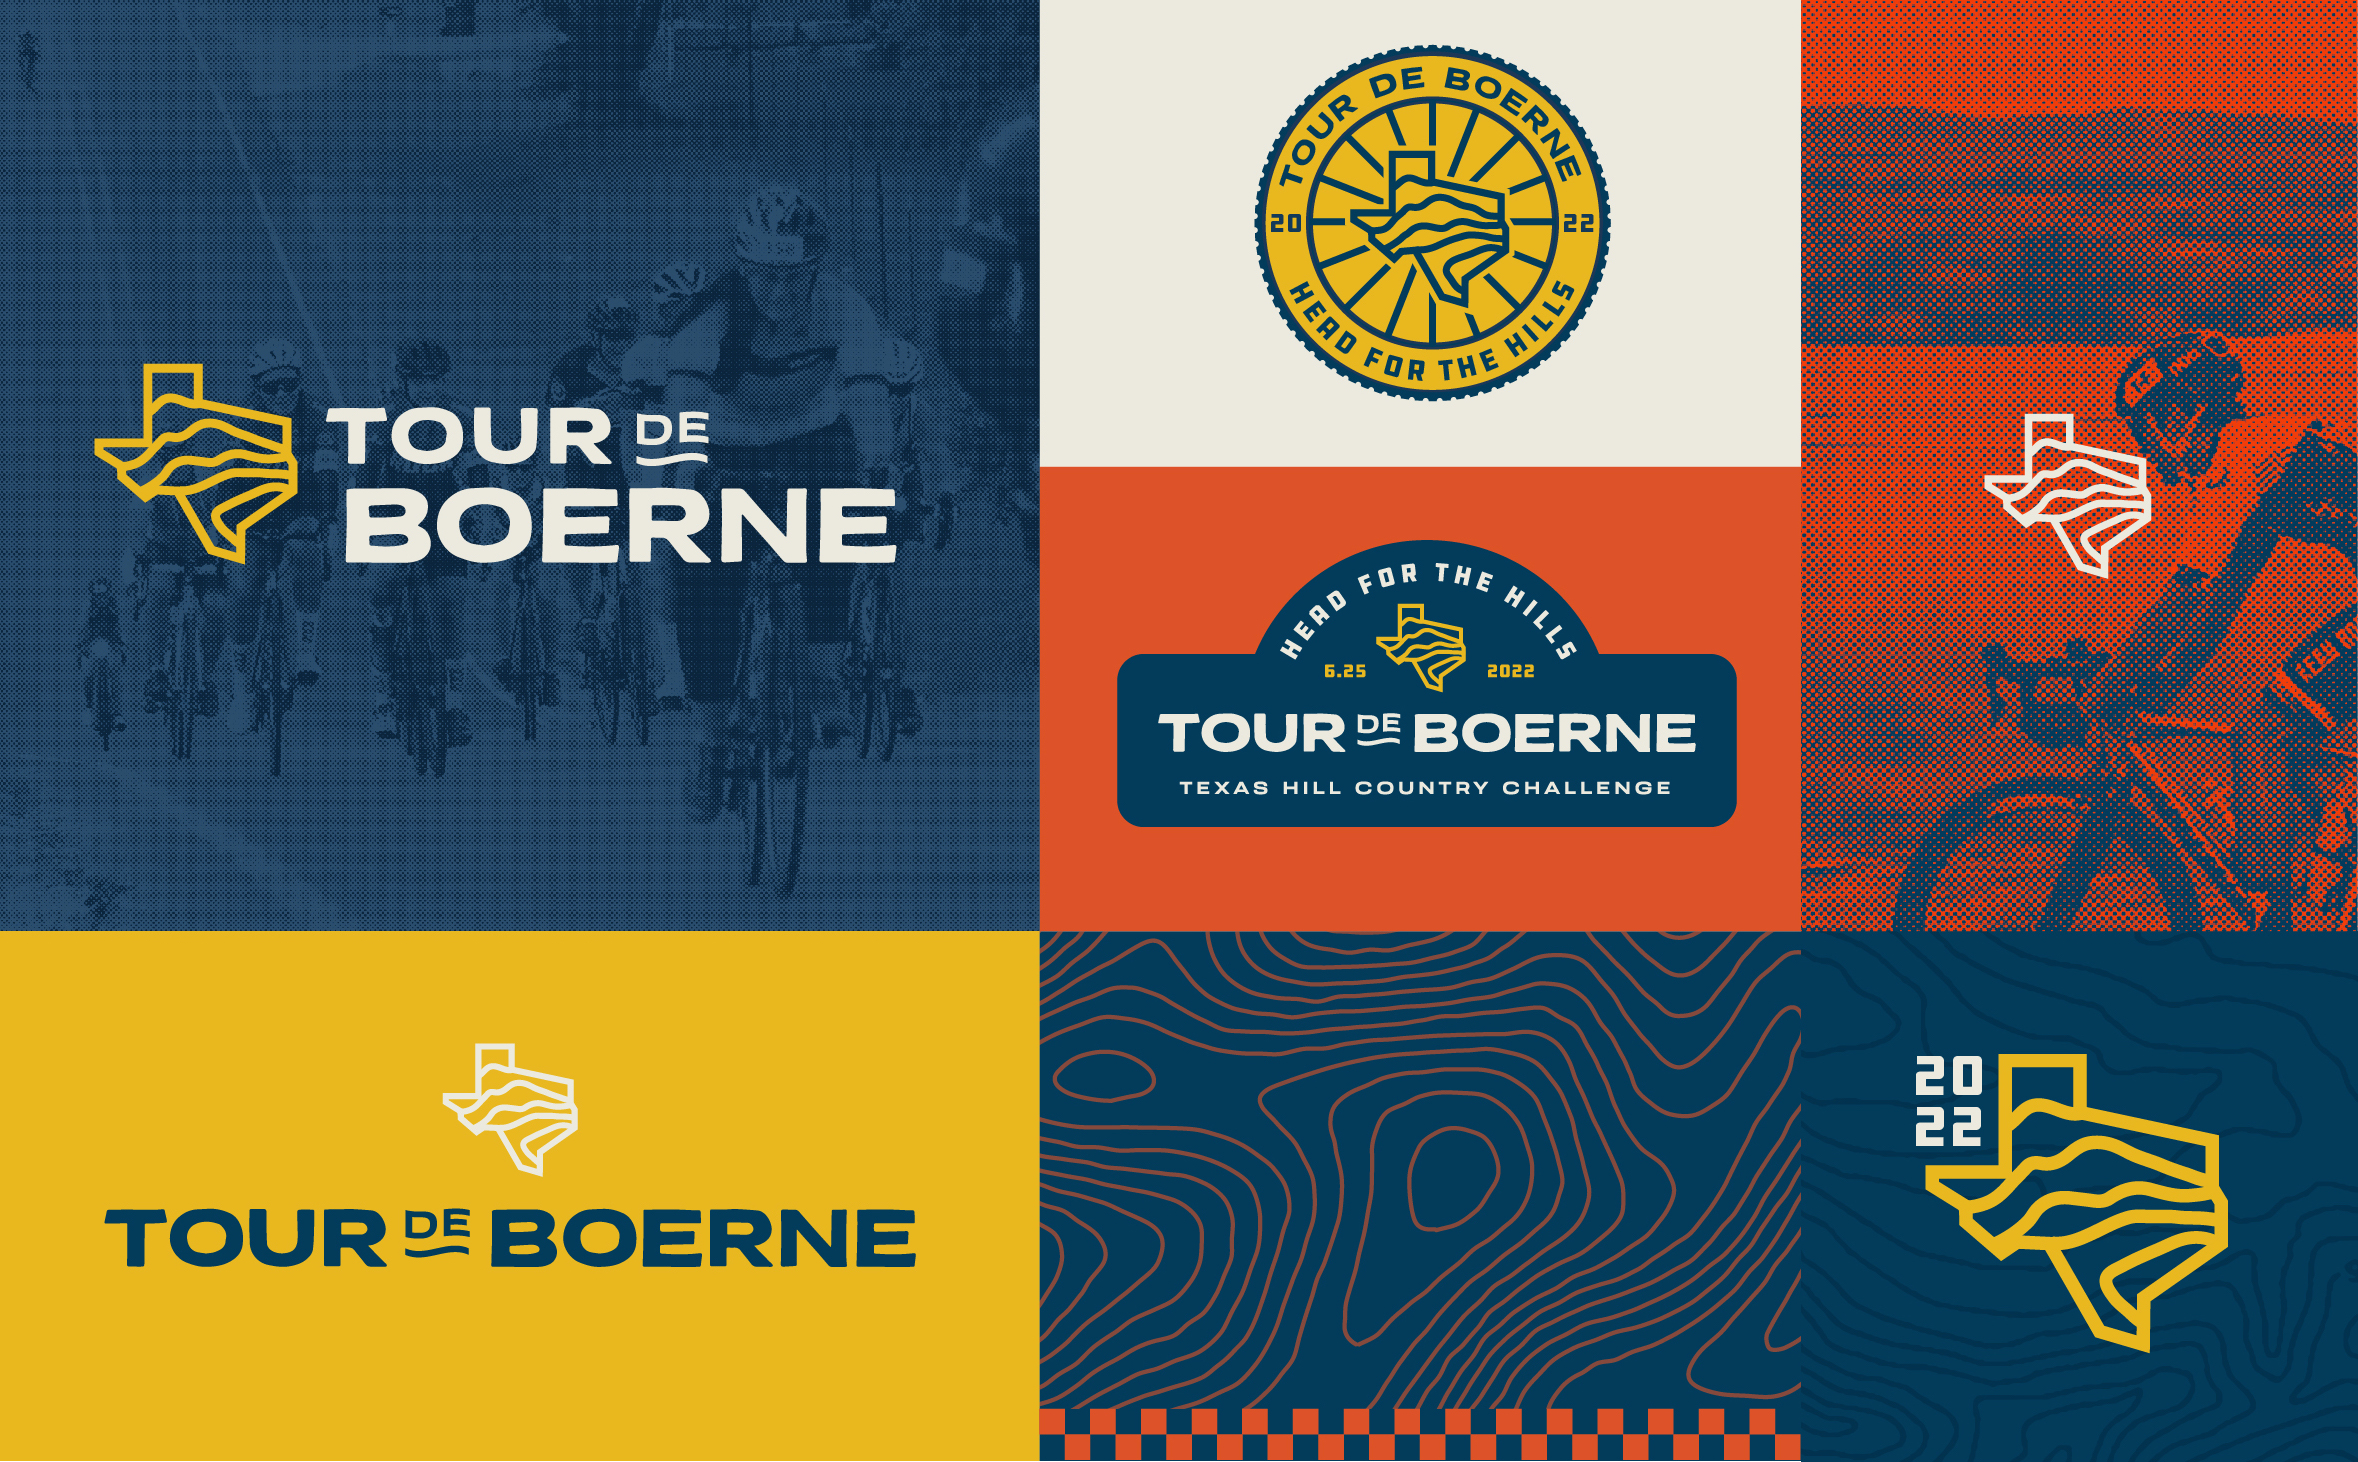 Showing the logos and branding created for Tour de Boerne. Branding designed by MDR for this San Antonio-based organization.